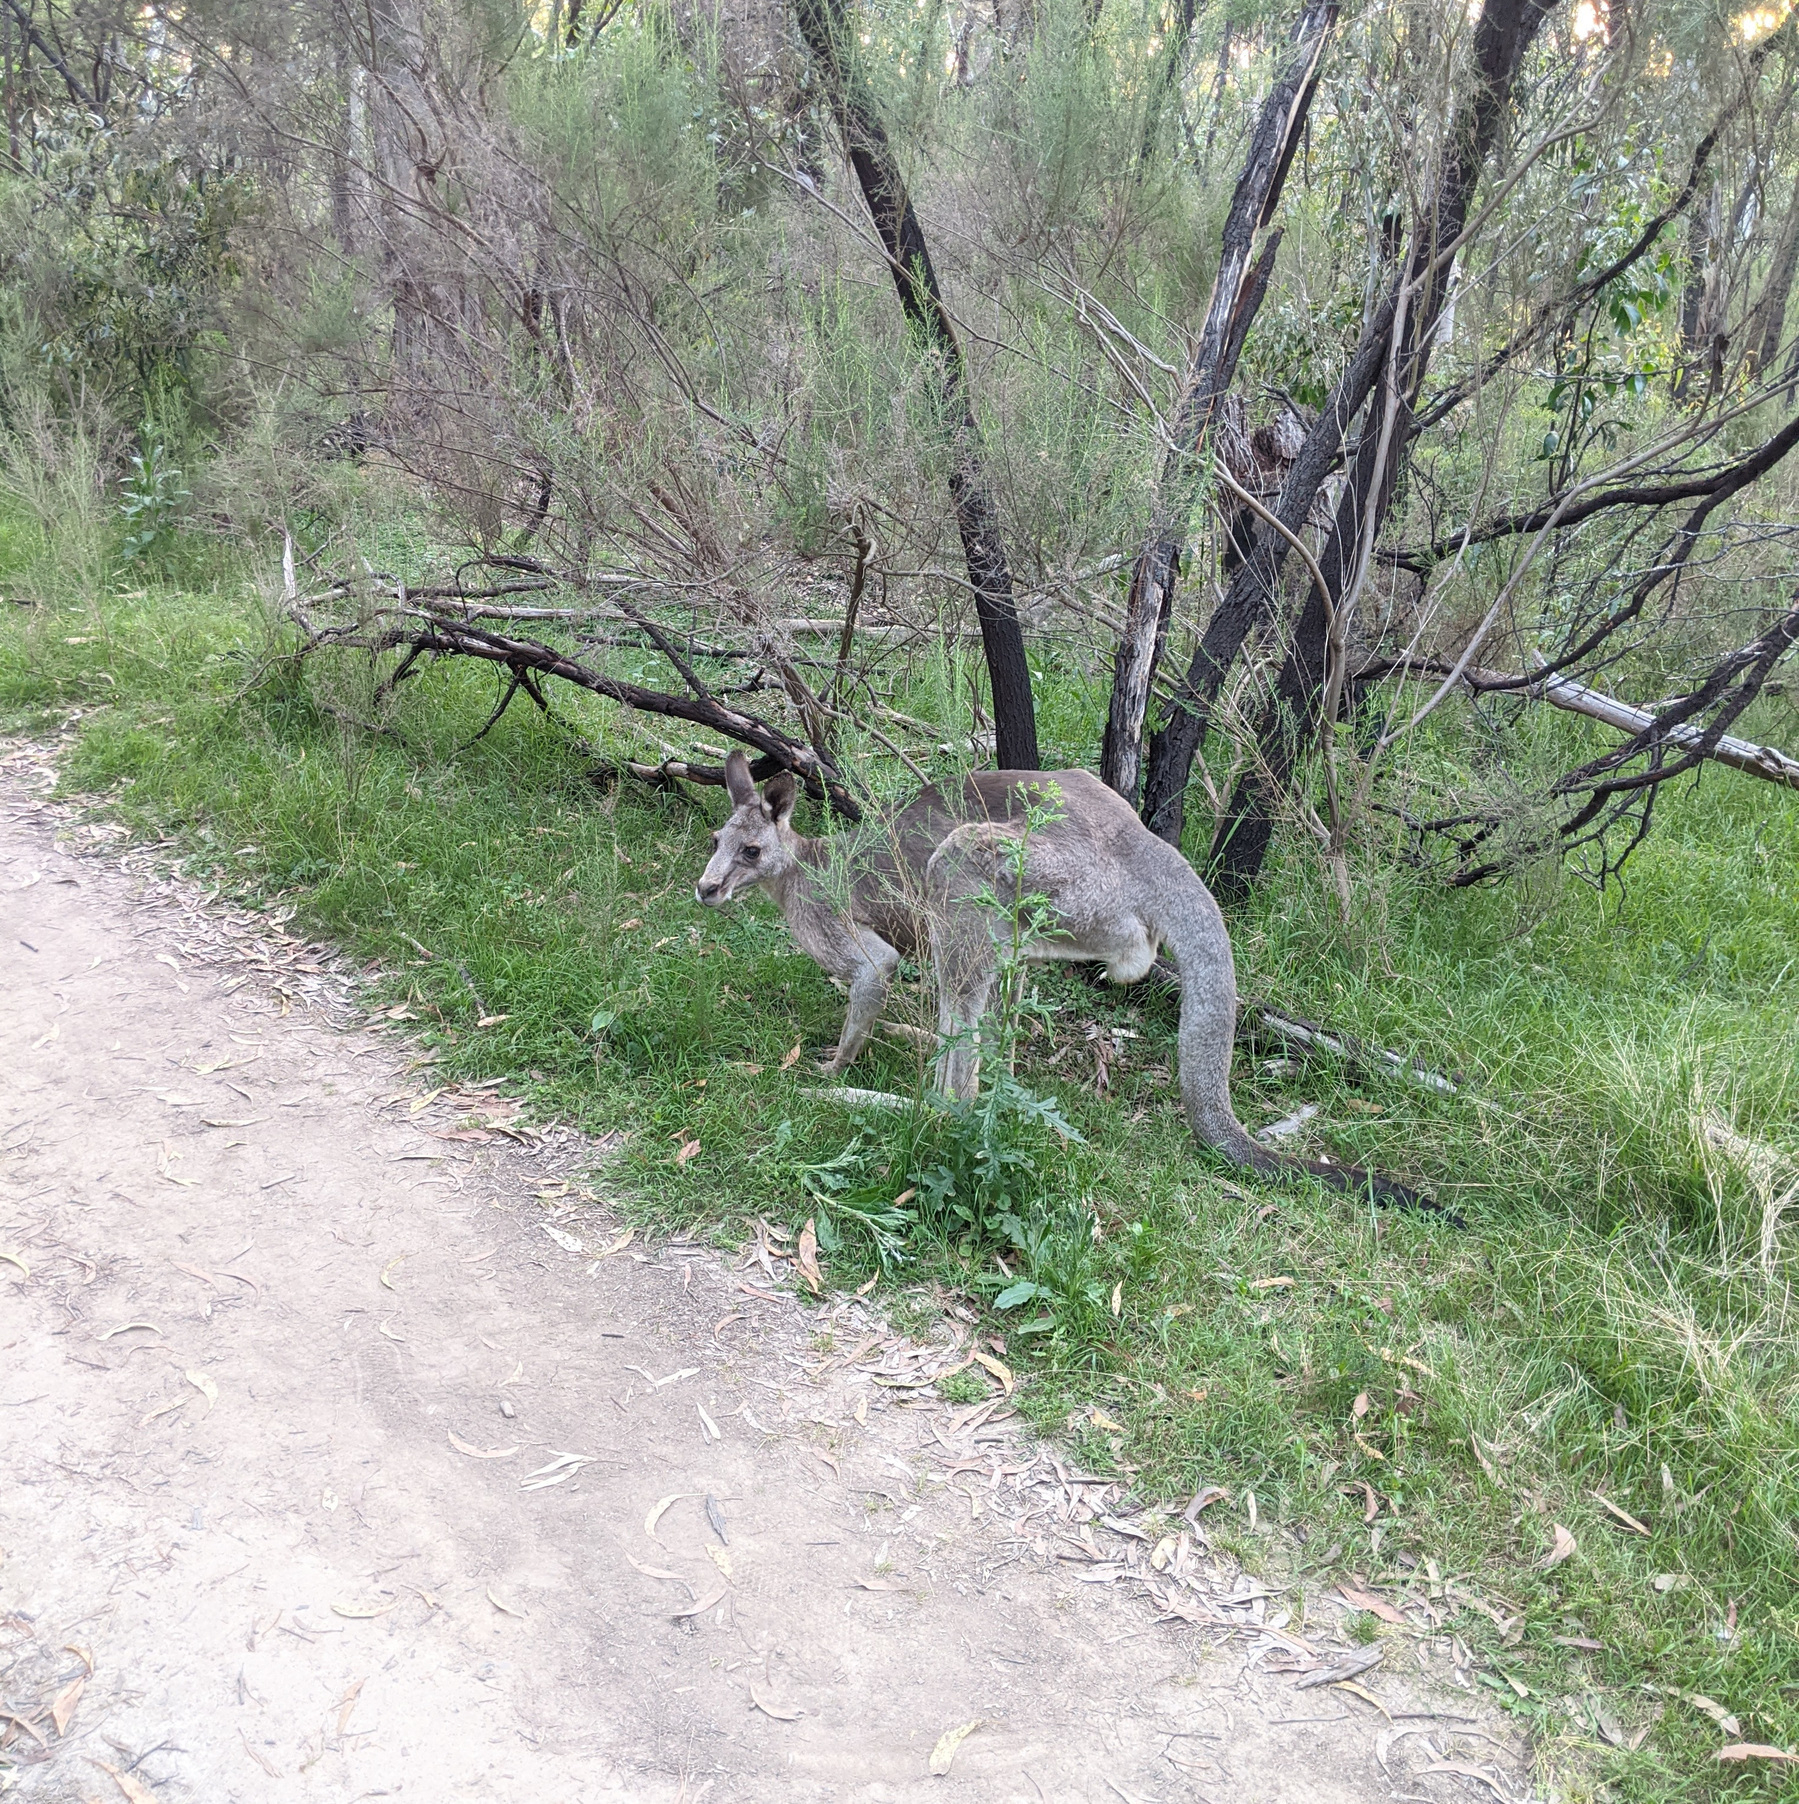 A kangaroo by a forest path